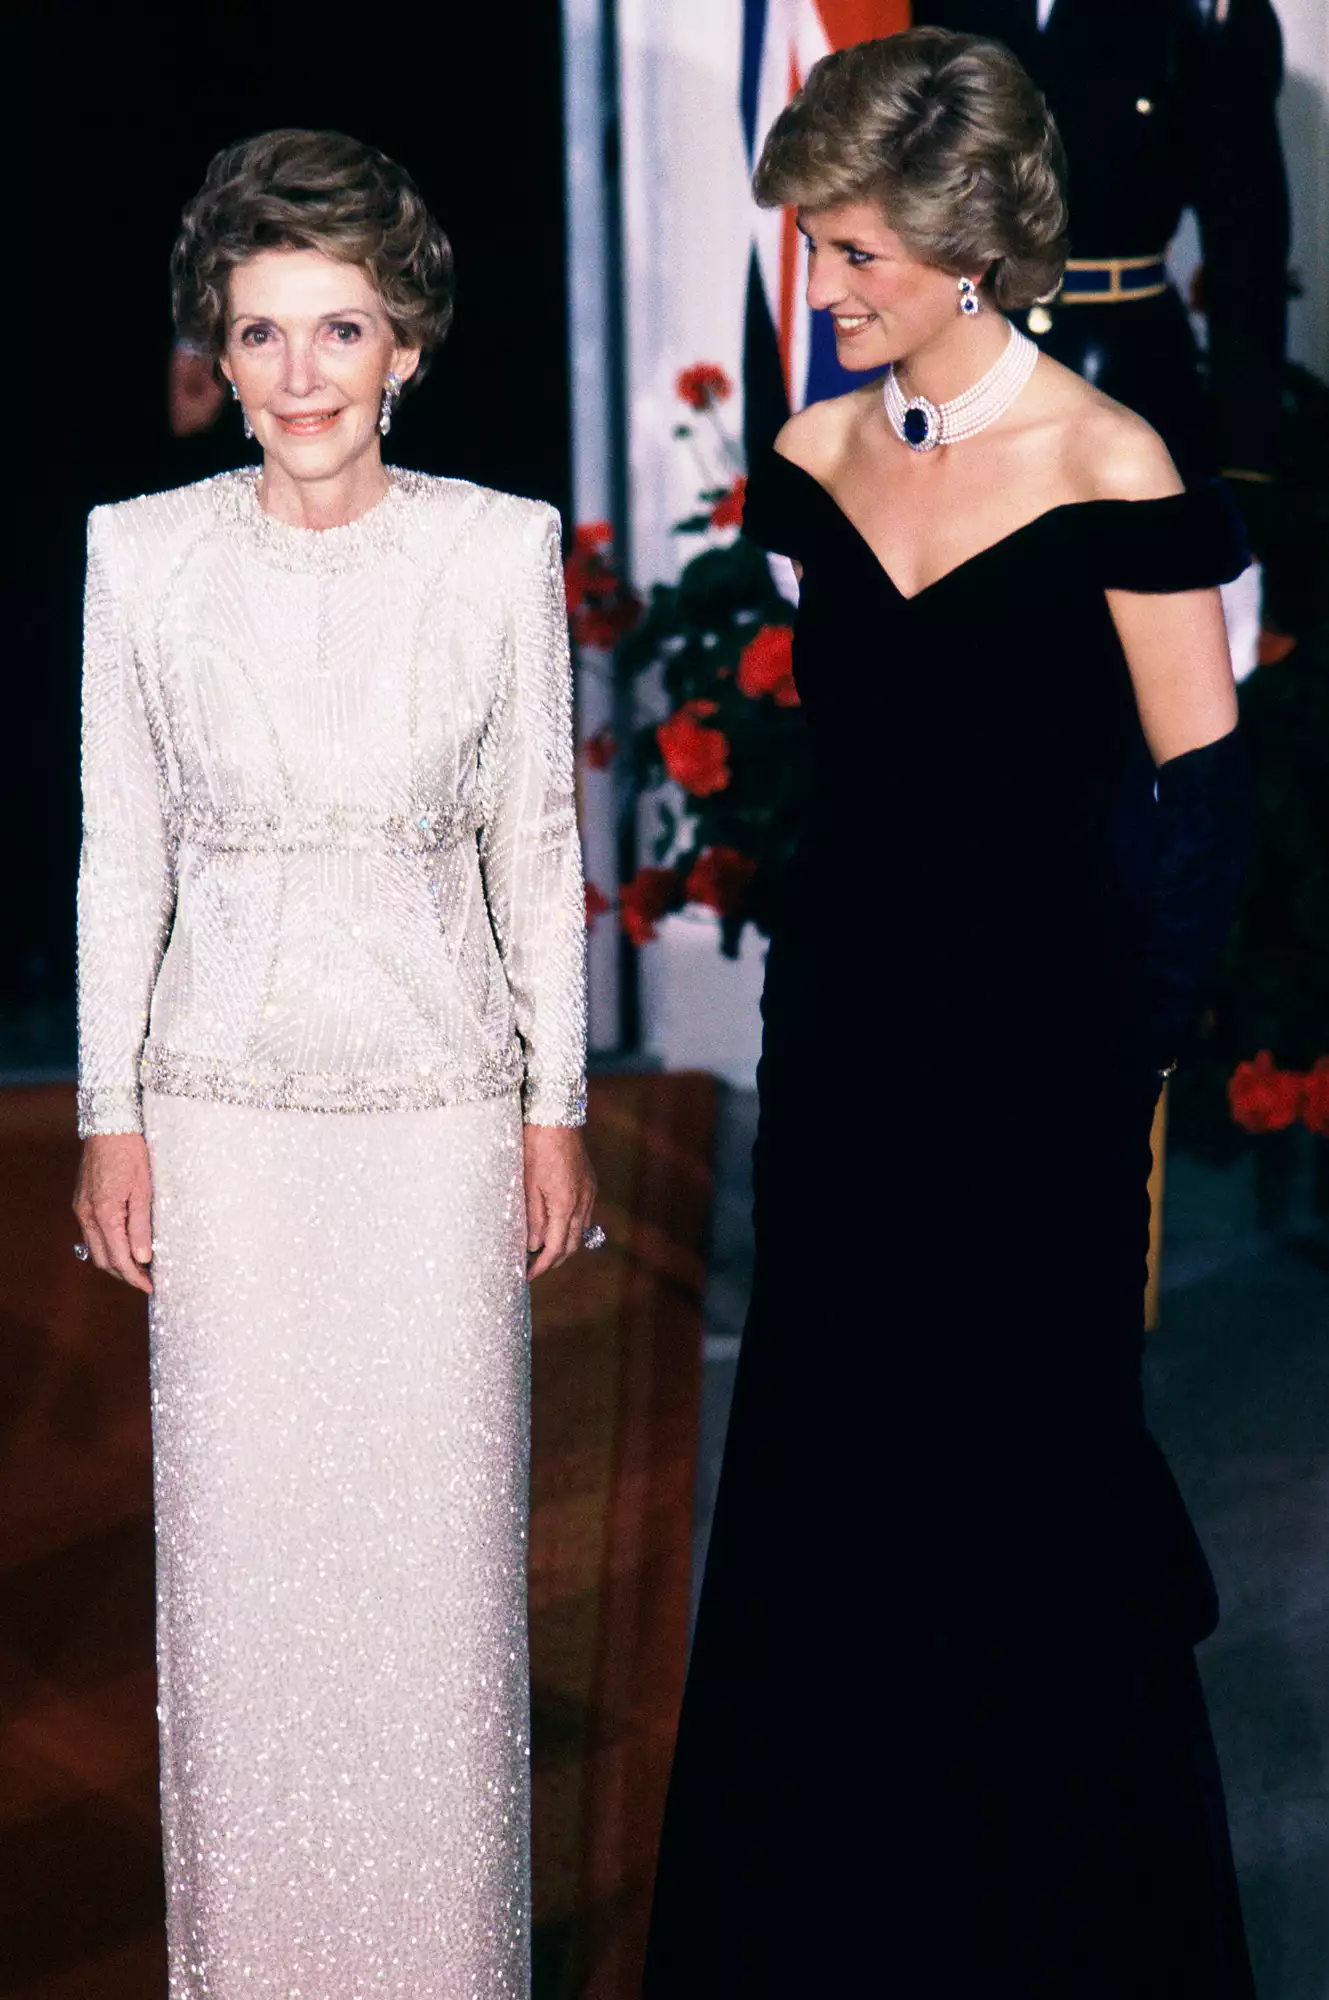 Diana Princess Of Wales, With Nancy Reagan At The White House, Wearing A Dress Designed By Fashion Designer Victor Edelstein